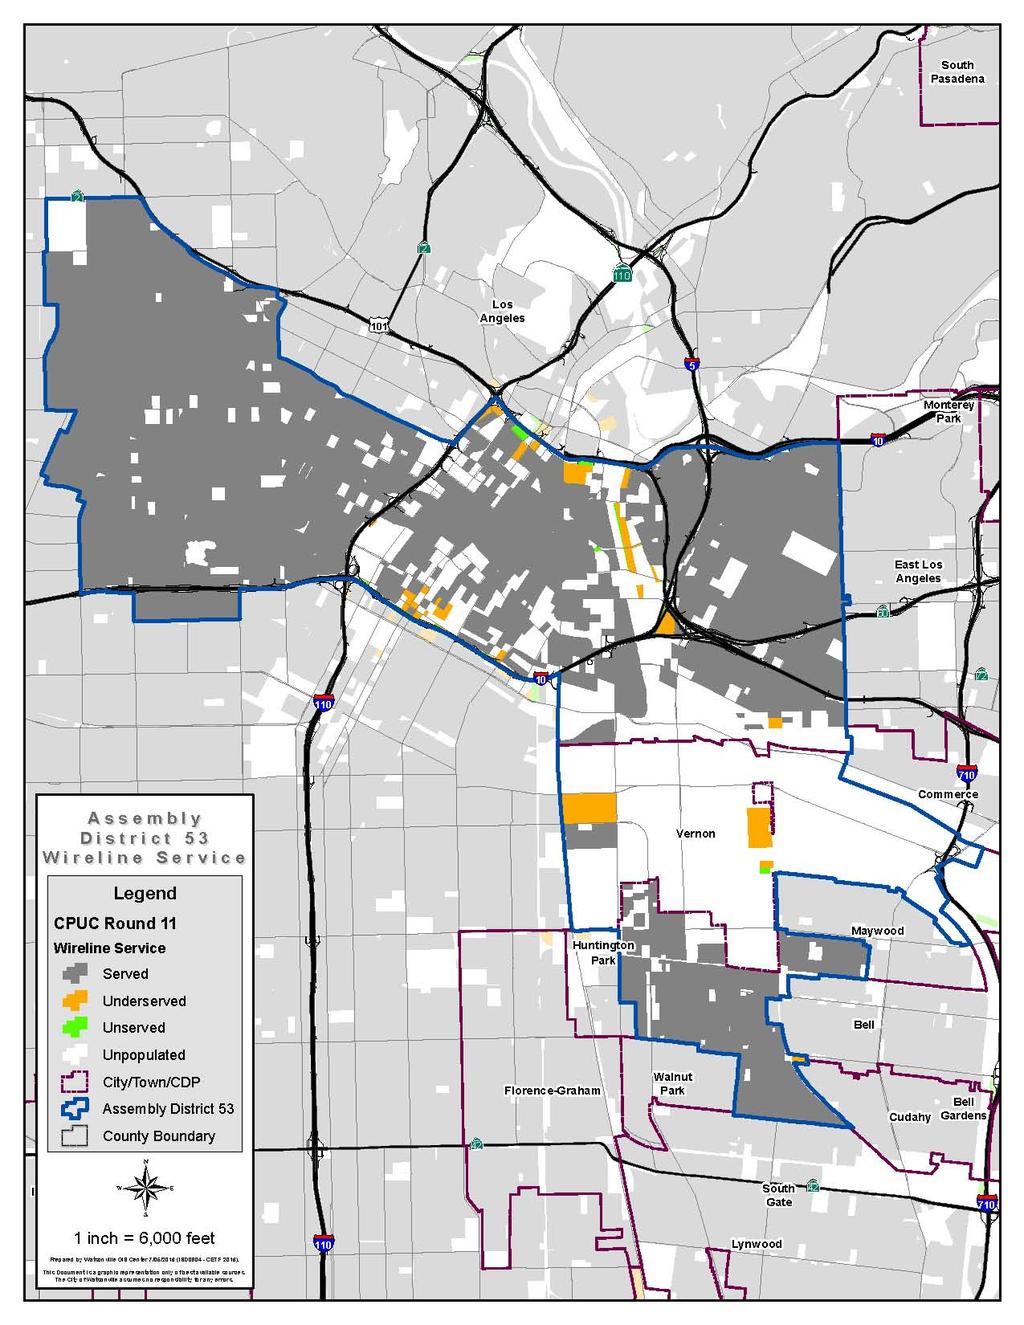 The Digital Divide In Assembly District 53: Broadband Wireline Service District 53 Served Underserved Unserved Total Households 173,779 119 6 173,904 100% 0% 0% 100% Population 463,430 400 86 463,916